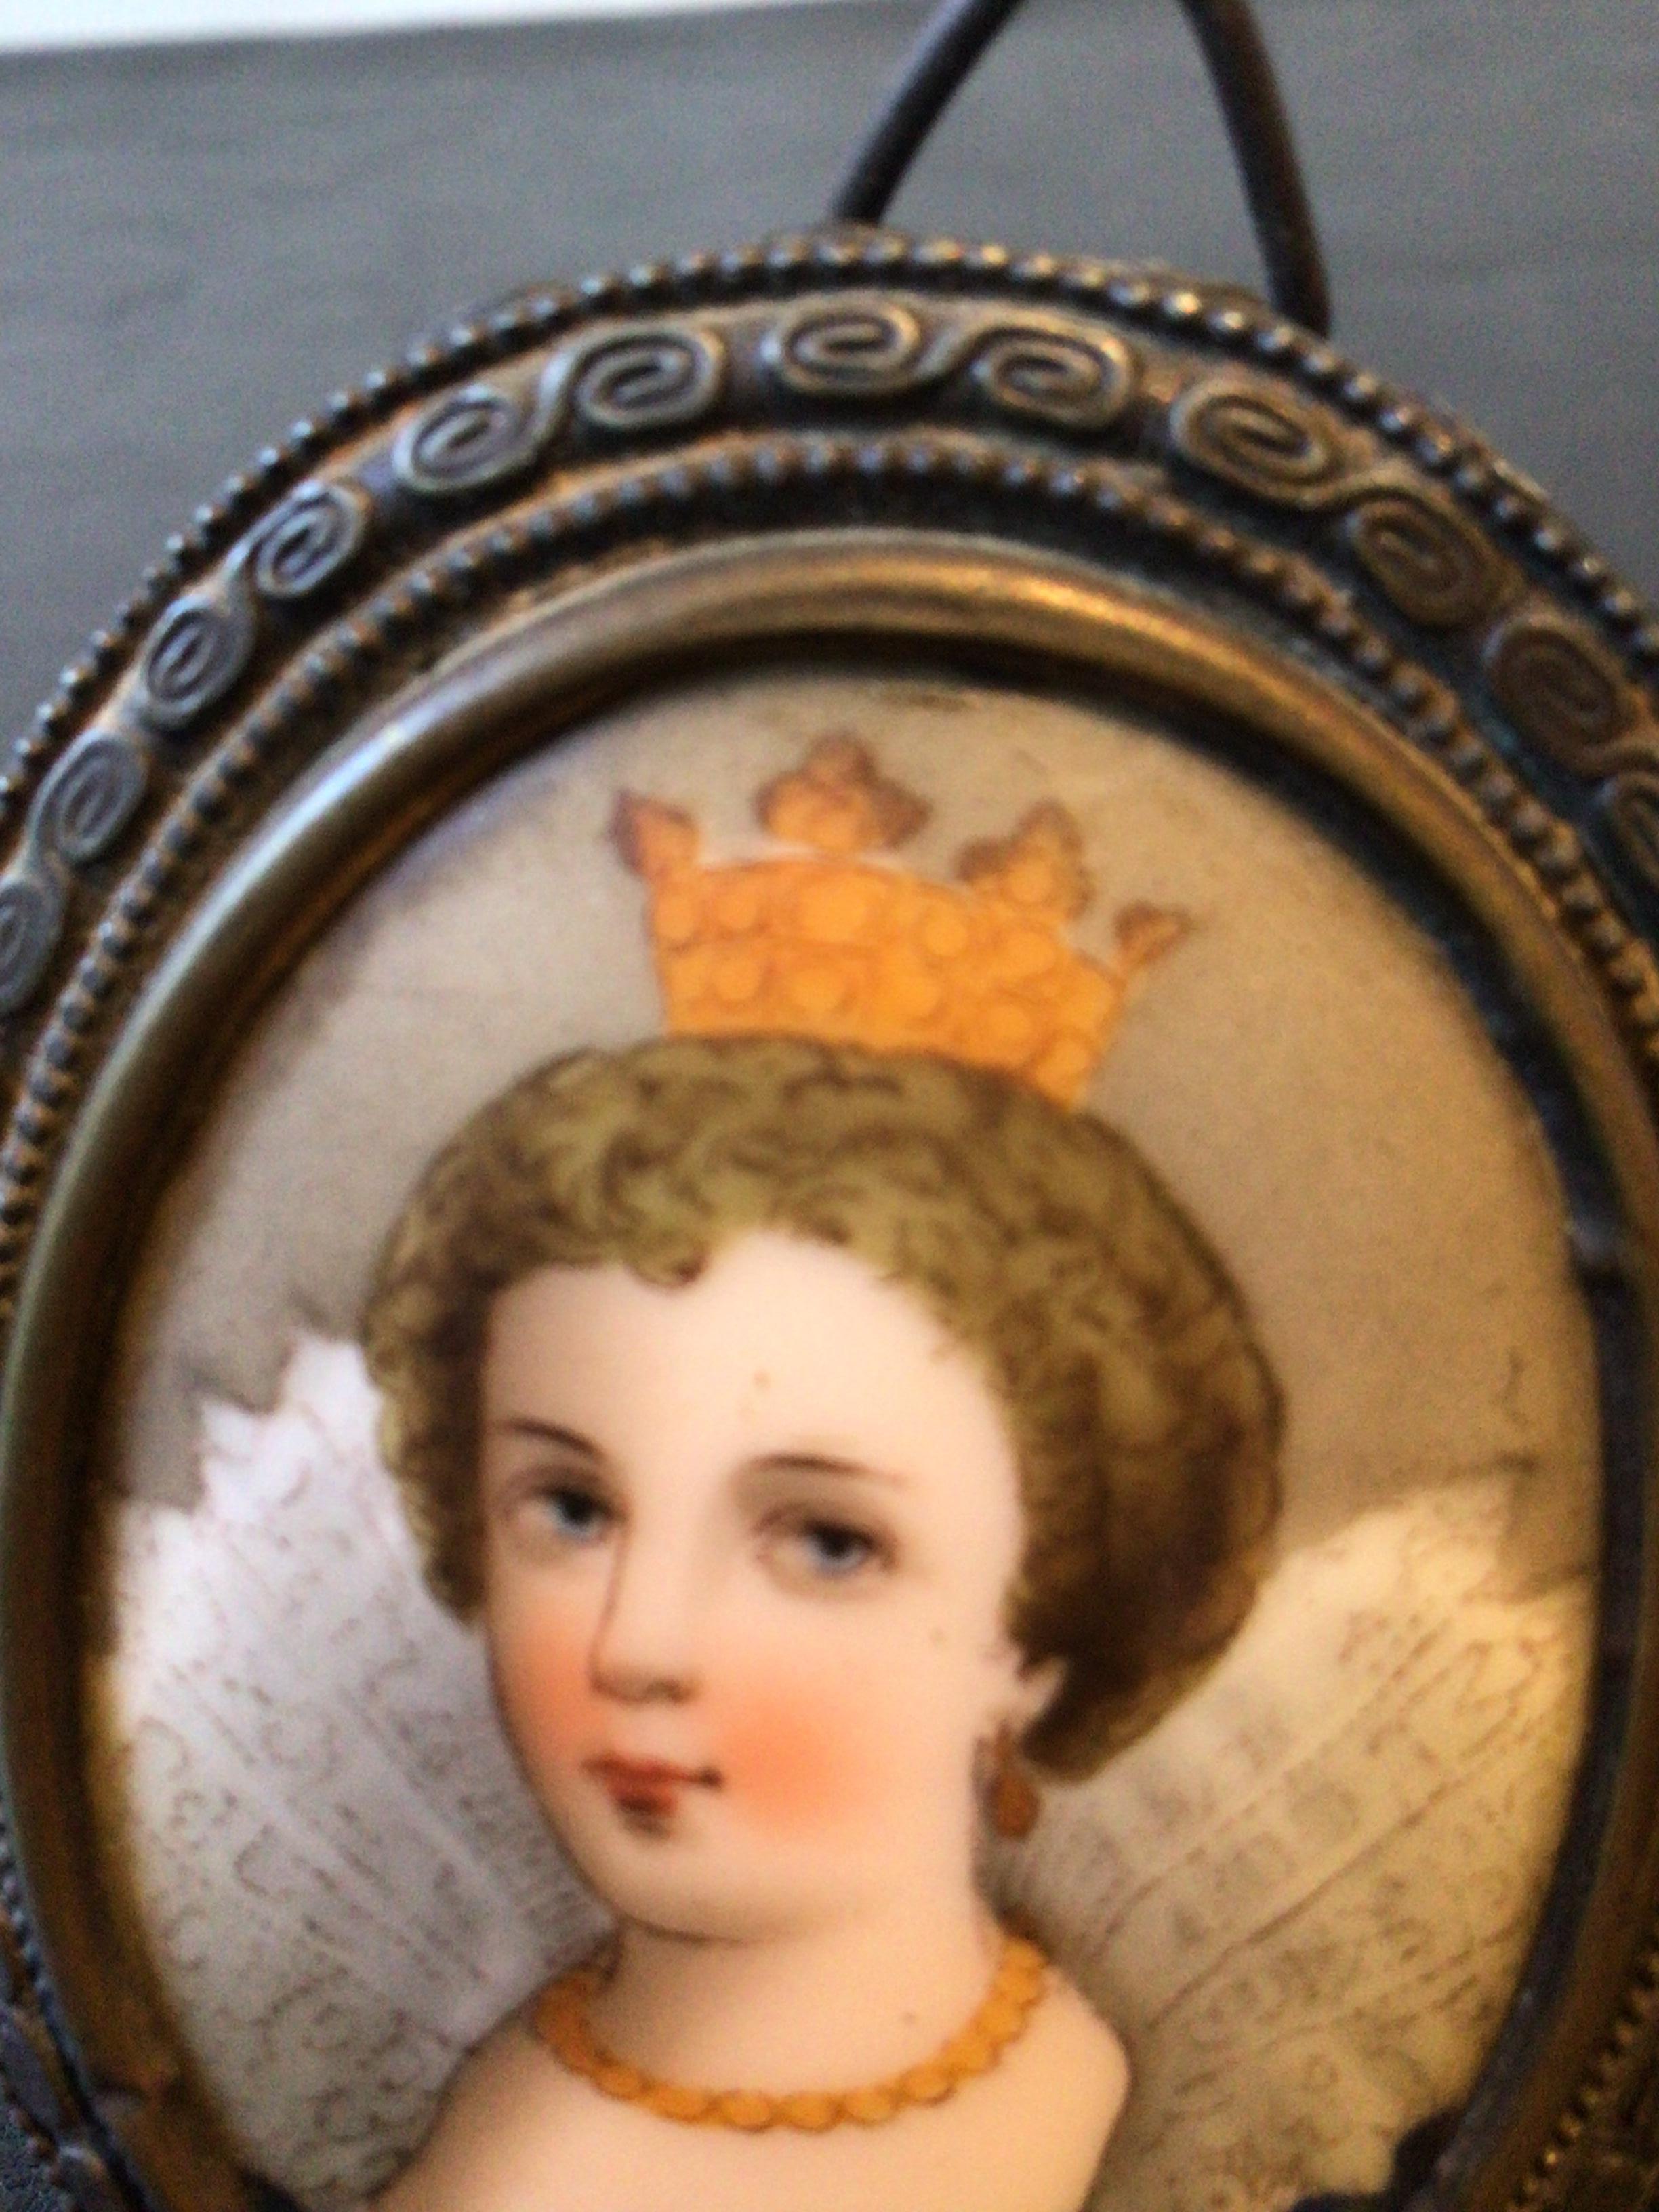 1890s Minature painting of a queen on ceramic in a brass frame.